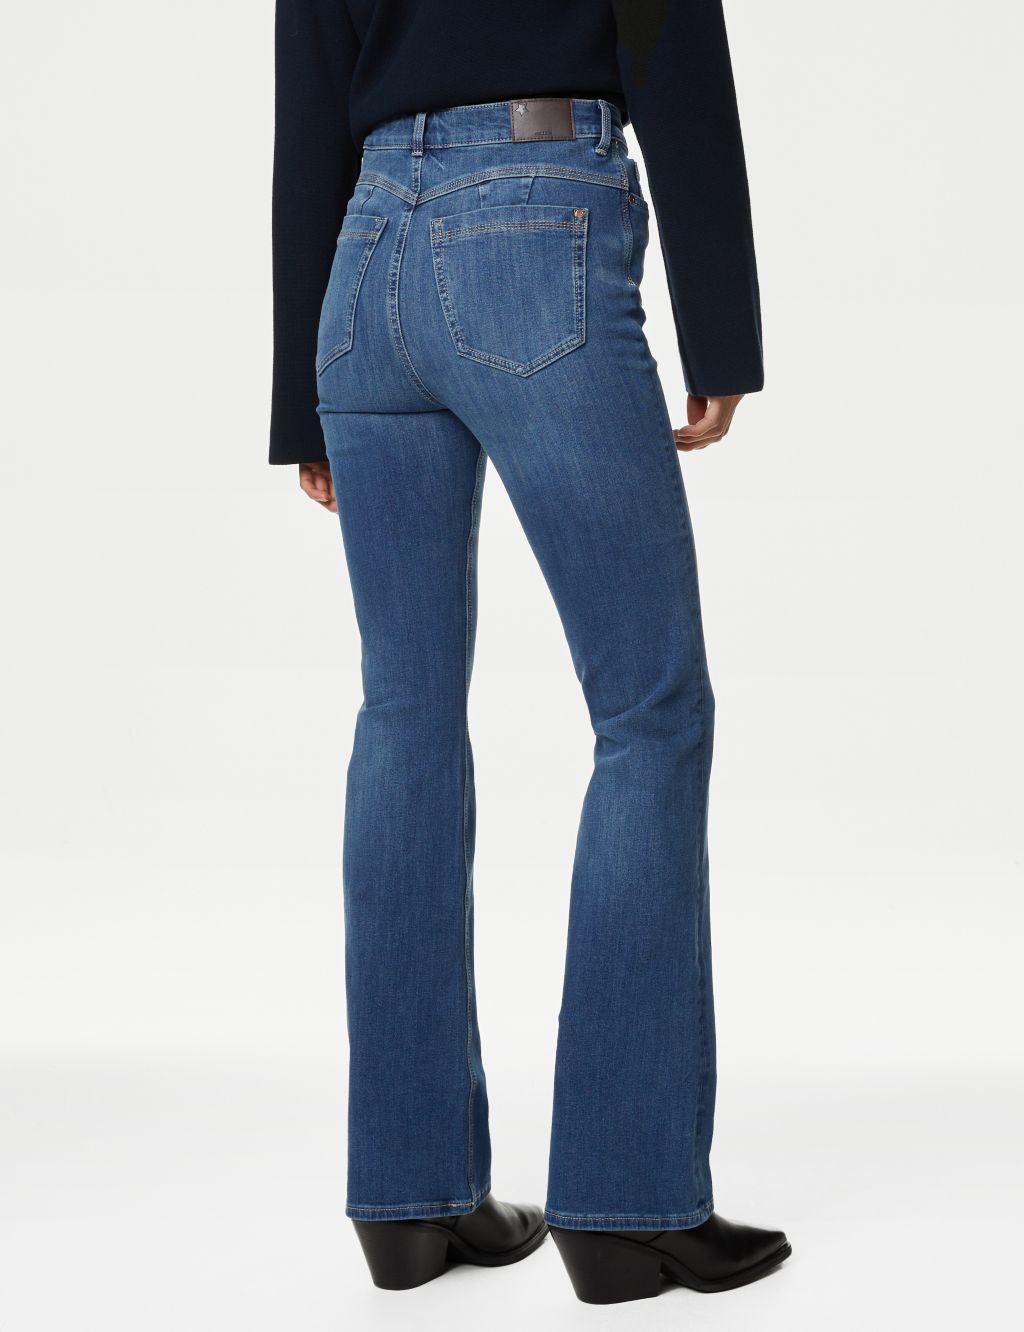 Magic Shaping High Waisted Slim Flare Jeans image 5